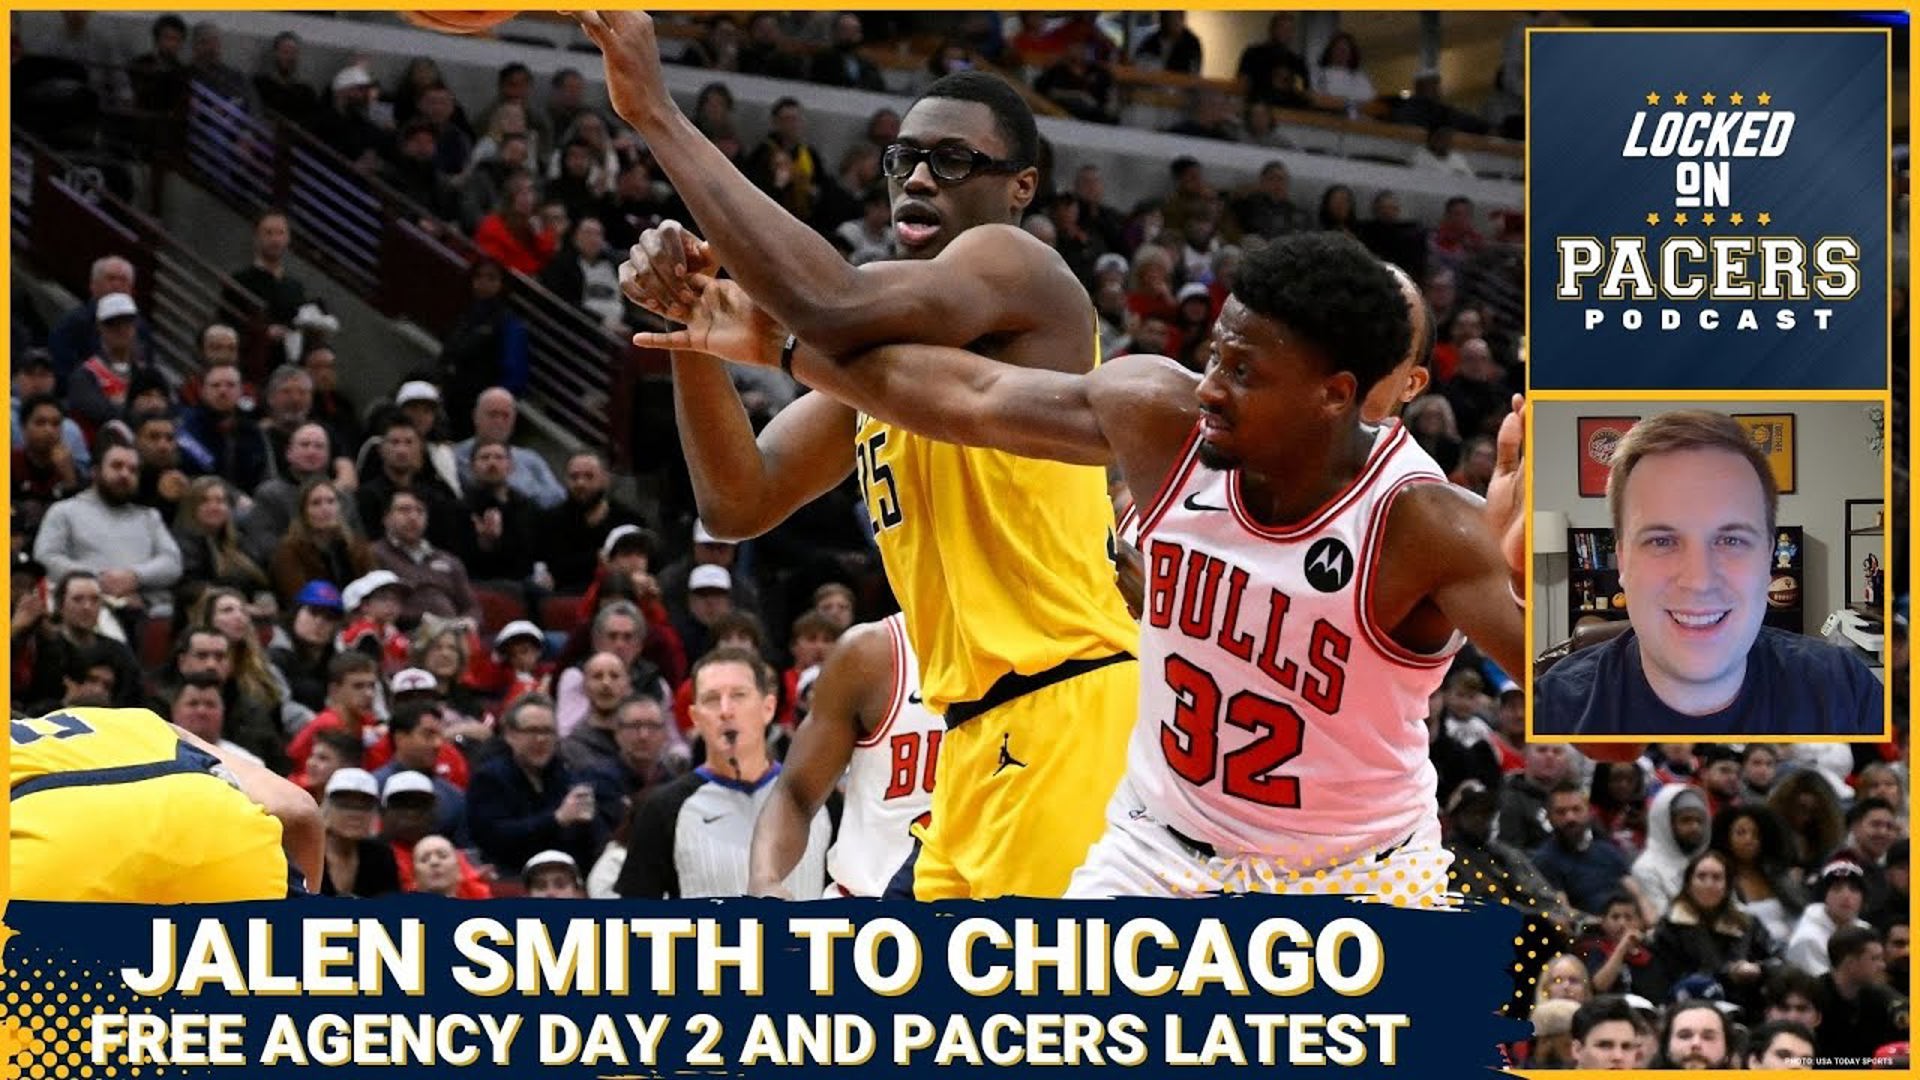 Indiana Pacers free agency day 2. More Pacers rumors, Jalen Smith to Chicago Bulls, timing of moves